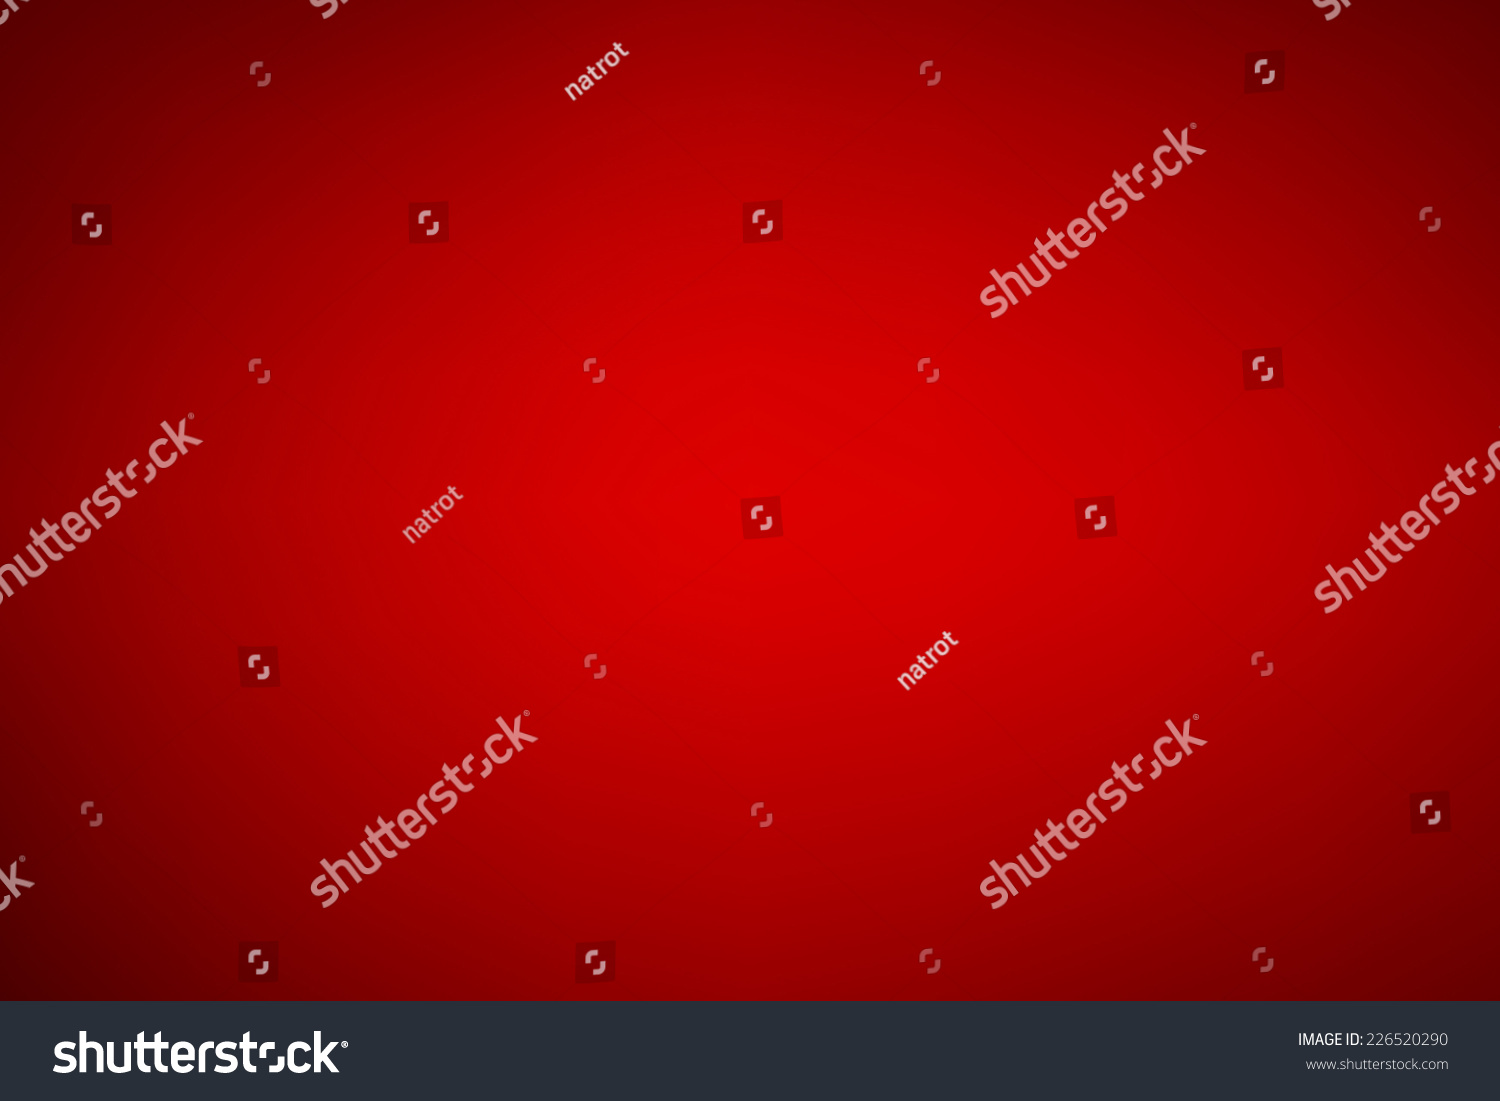 Red abstract background - Vector #226520290